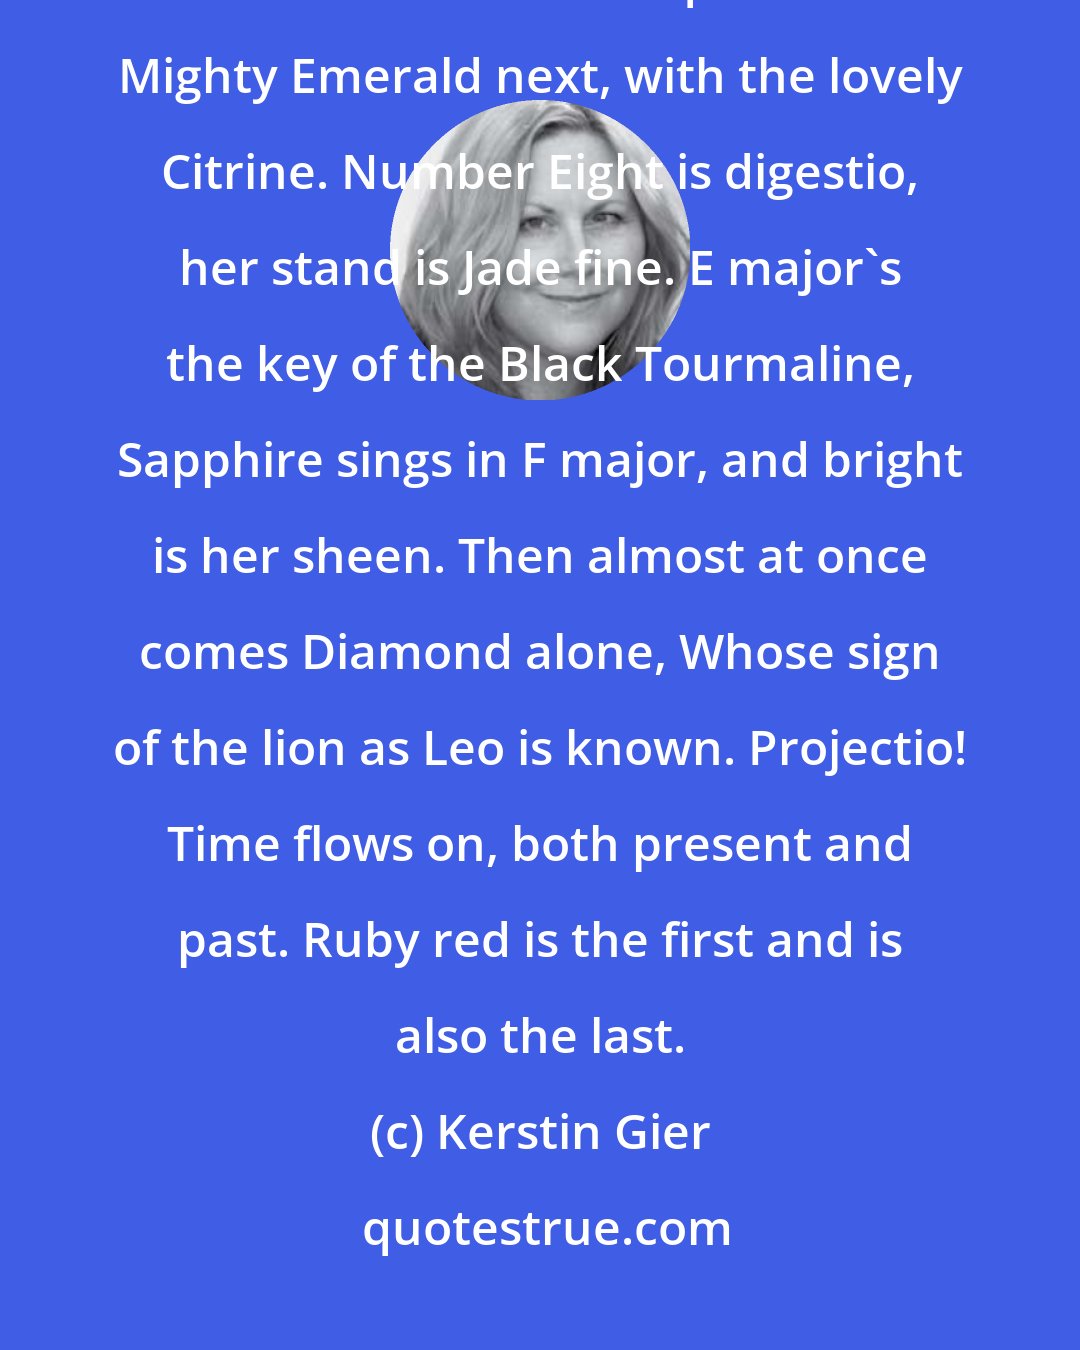 Kerstin Gier: The first pair Opal and Amber are, Agate sings in B flat, the wolf avatar, A duet-solutio! - with Aquamarine. Mighty Emerald next, with the lovely Citrine. Number Eight is digestio, her stand is Jade fine. E major's the key of the Black Tourmaline, Sapphire sings in F major, and bright is her sheen. Then almost at once comes Diamond alone, Whose sign of the lion as Leo is known. Projectio! Time flows on, both present and past. Ruby red is the first and is also the last.